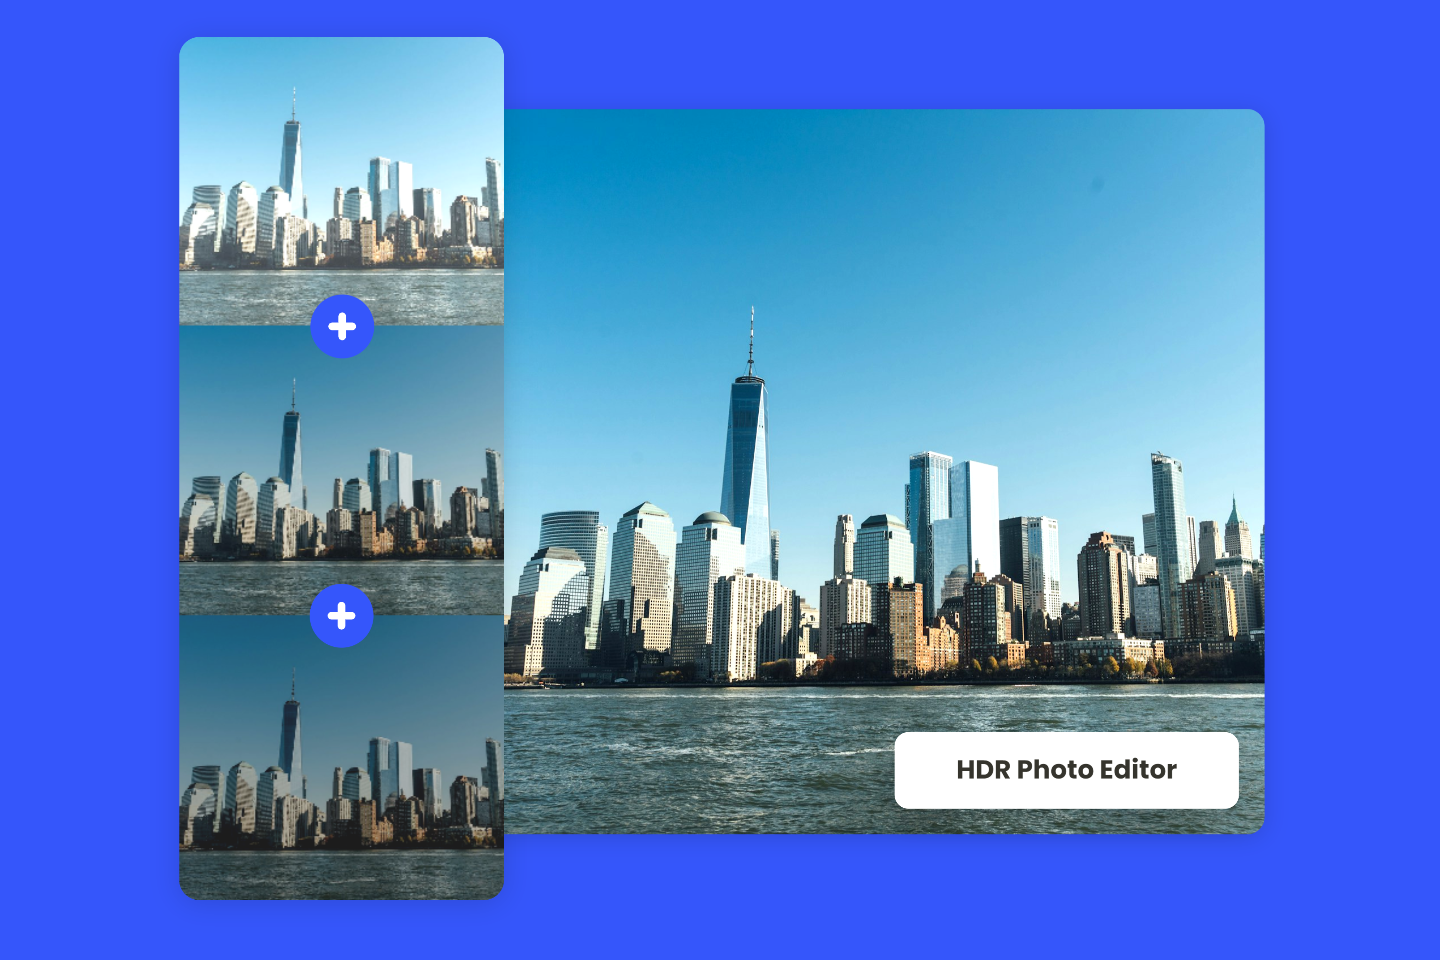 Use fotors hdr photo editor to merge three building photos of different brightness into one with suitable brightness